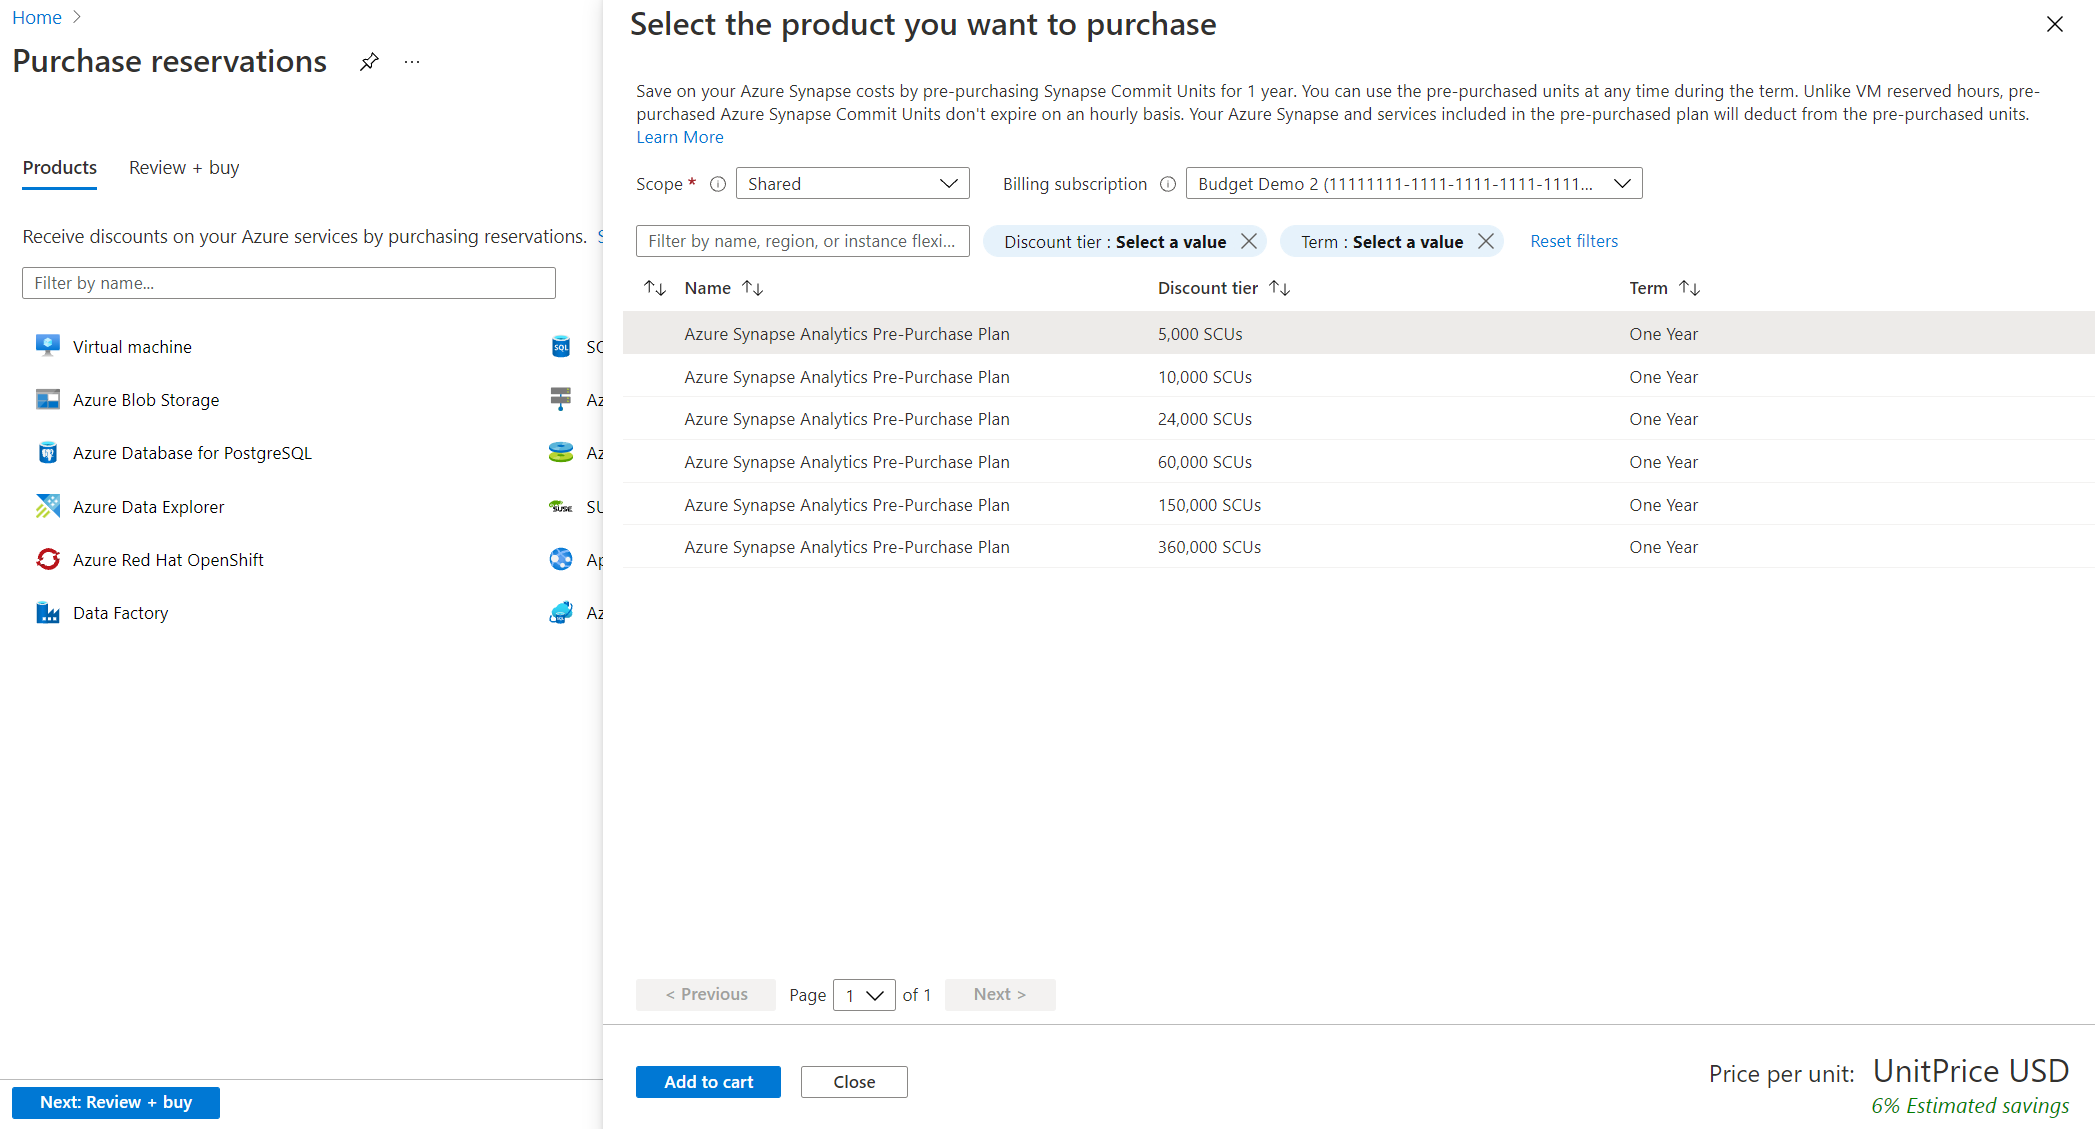 Screenshot showing the Select the product experience for the Azure Synapse Analytics Pre-Purchase Plan.